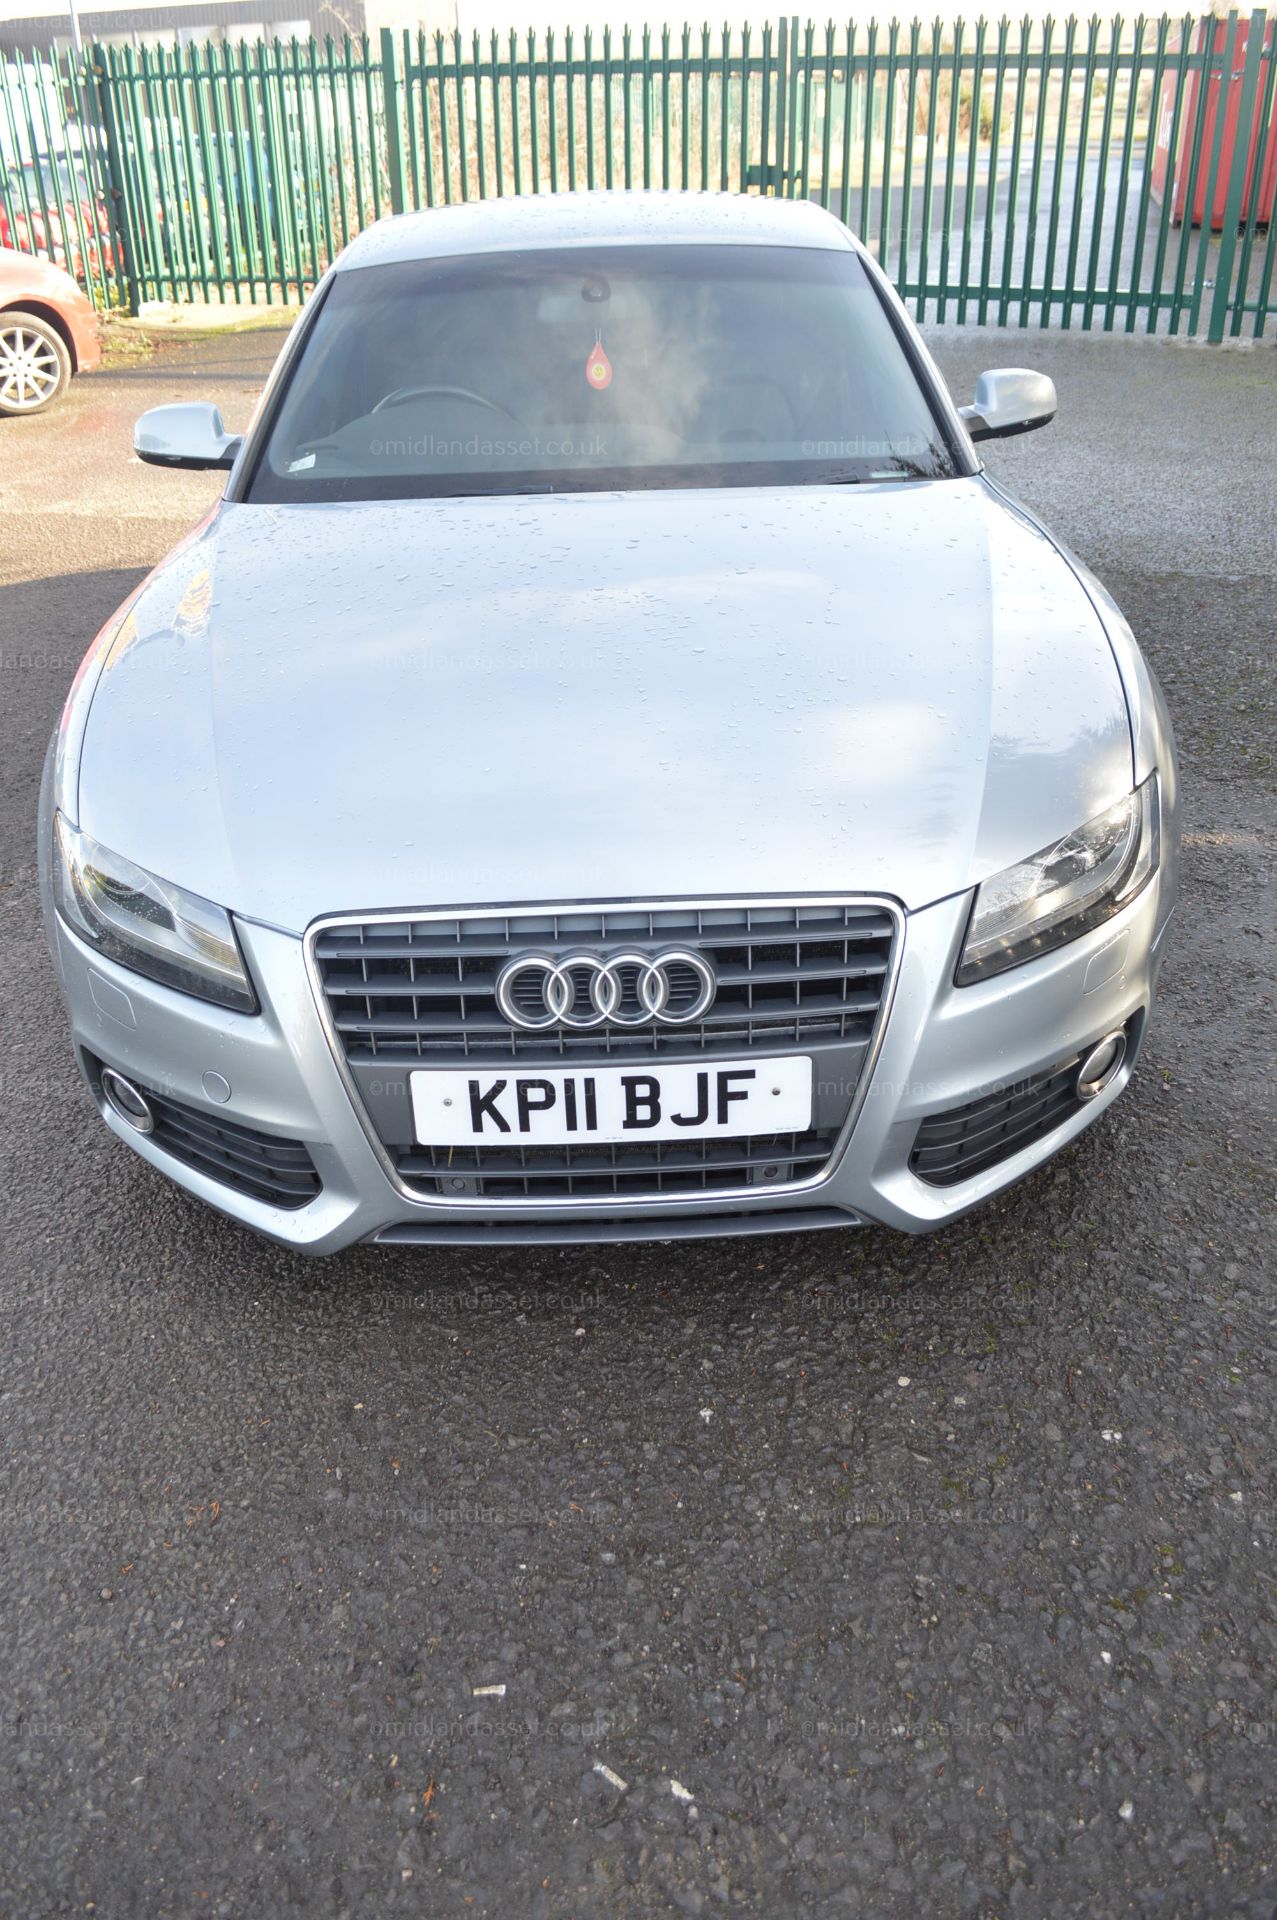 NR - 2011/11 REG AUDI A5 S LINE TDI, SERVICE HISTORY, 2 FORMER KEEPERS - Image 2 of 28